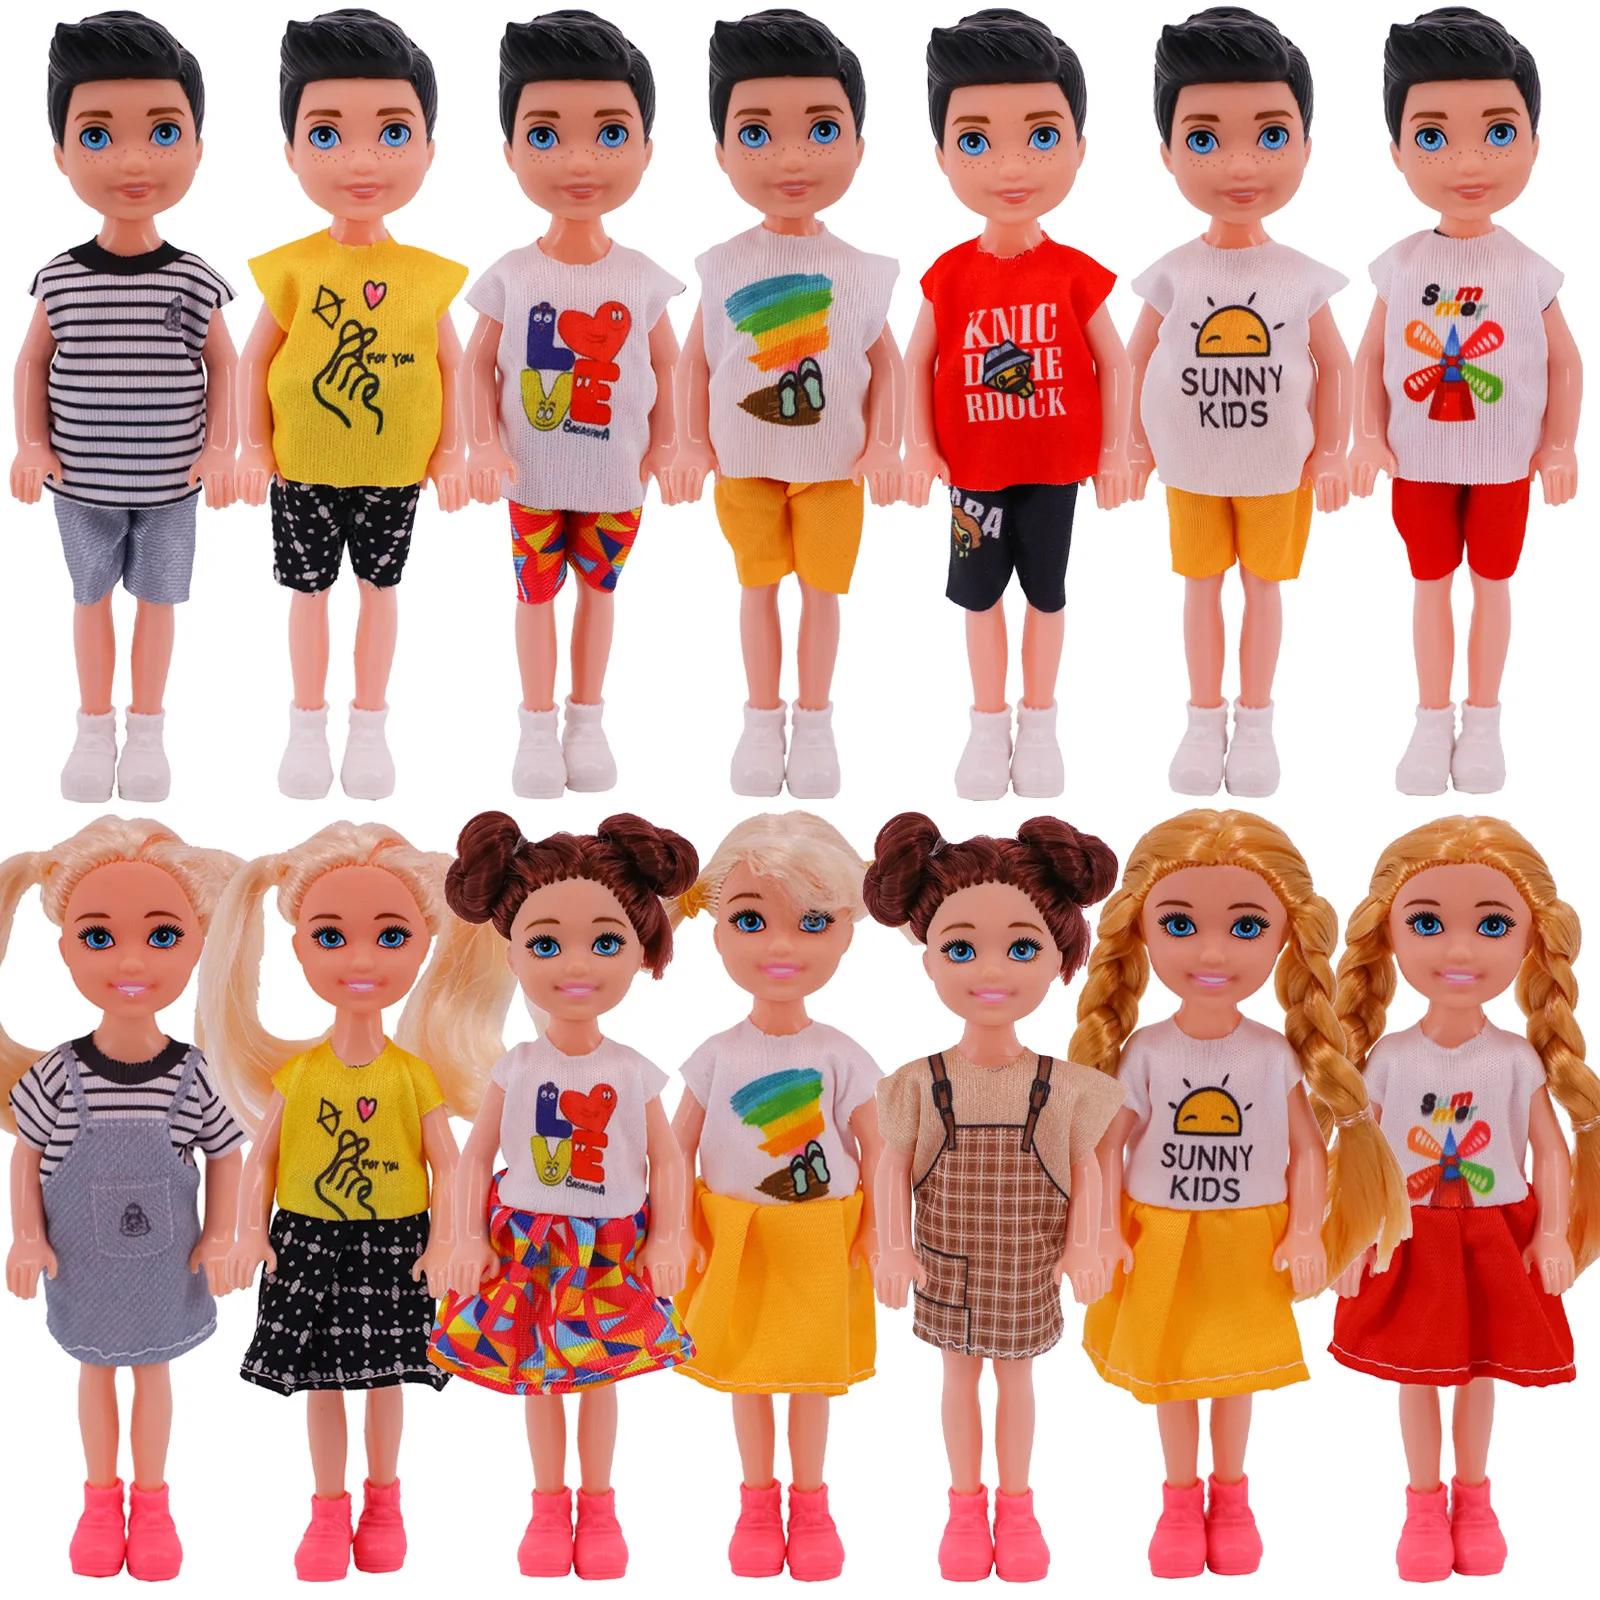 Doll Clothes For Kelly Dolls Handmade Fashion Dress T-shirts Shorts Accessories Fit 5Inch Dolls,12CM Kelly Doll,Our Generation doll clothes handmade cartoon patterned fit 18inch american doll